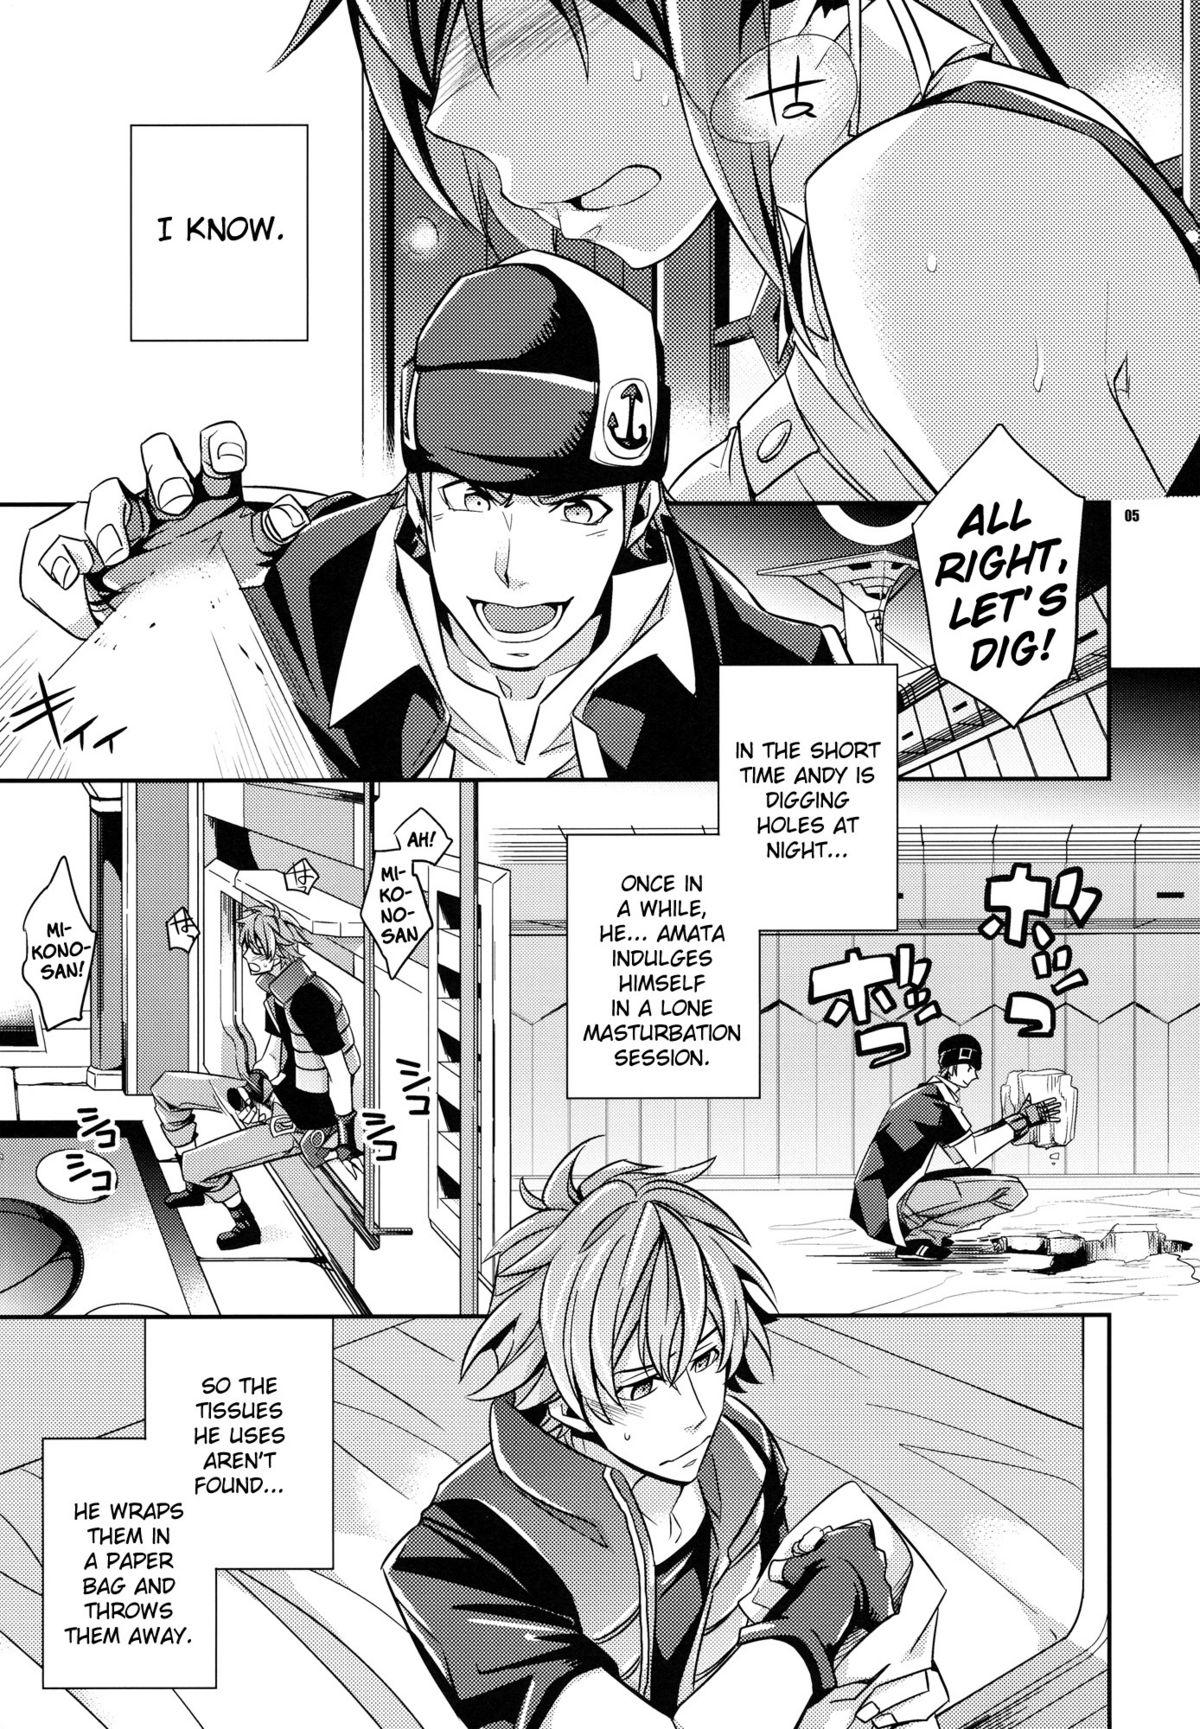 Toilet Zessica no Koufukuron | Zessica's Theory of Happiness - Aquarion evol Pounded - Page 3